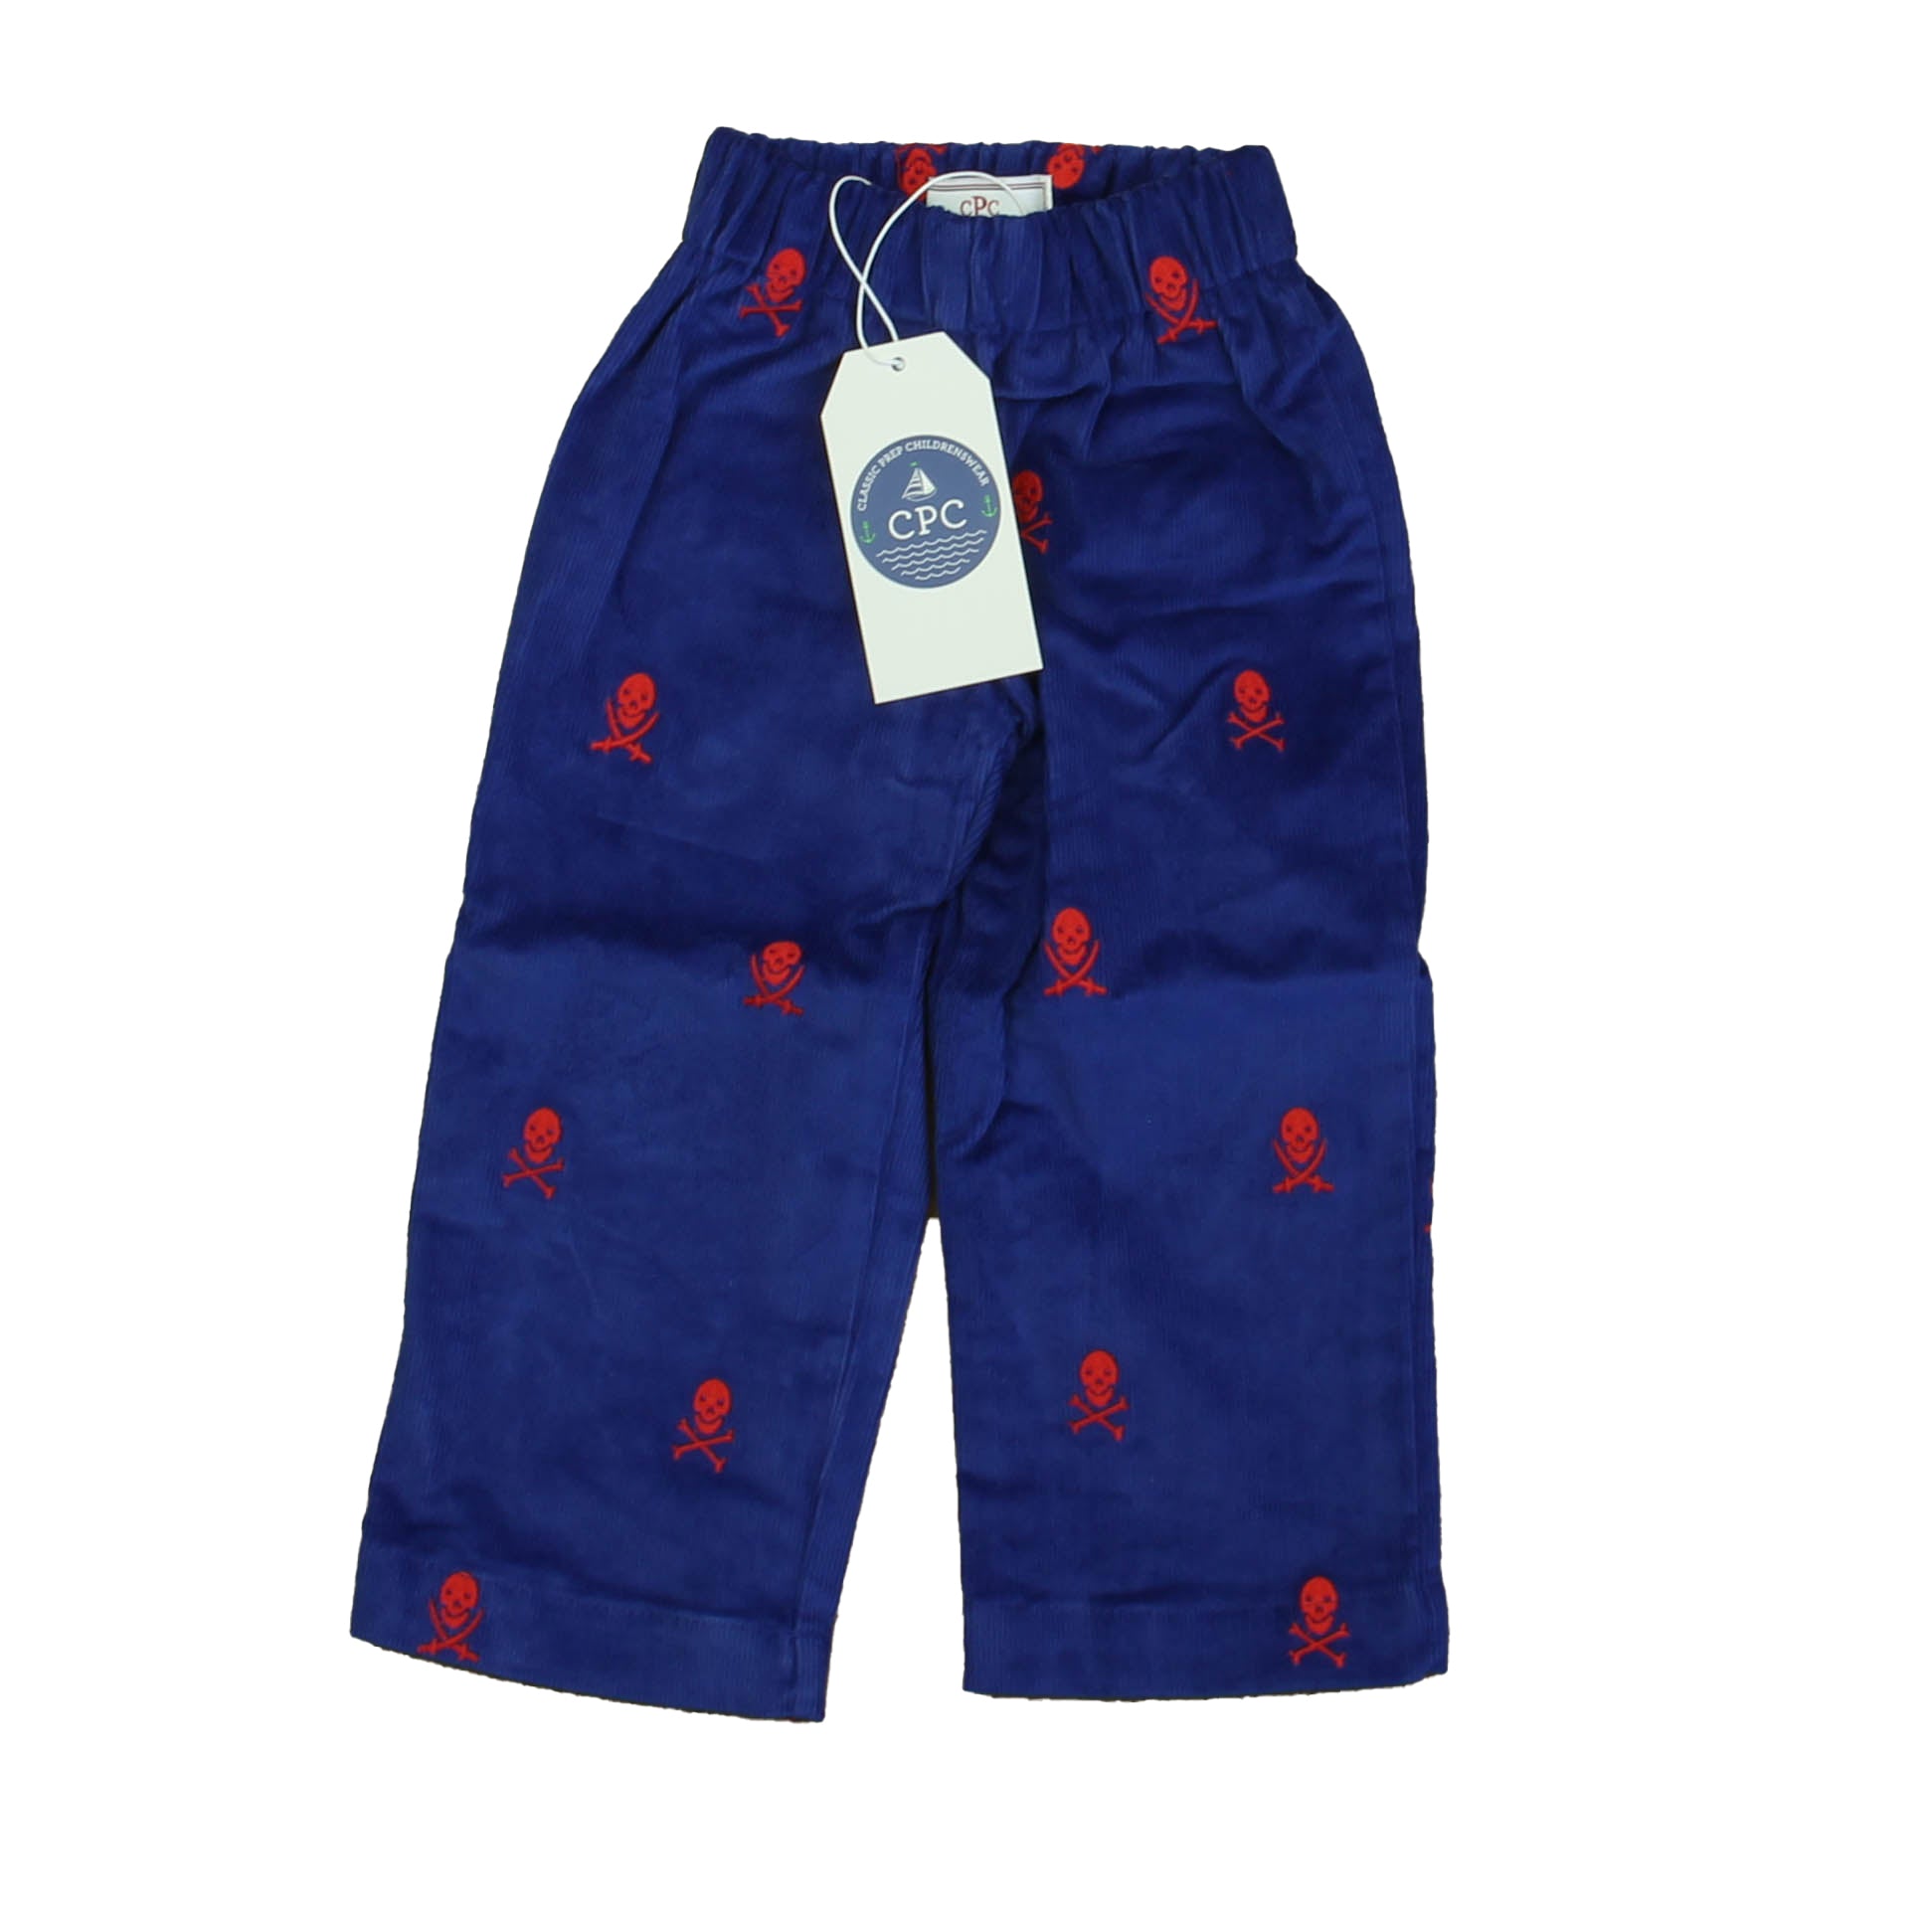 Bright Navy with Skull and Cross Bones / 12-18 months